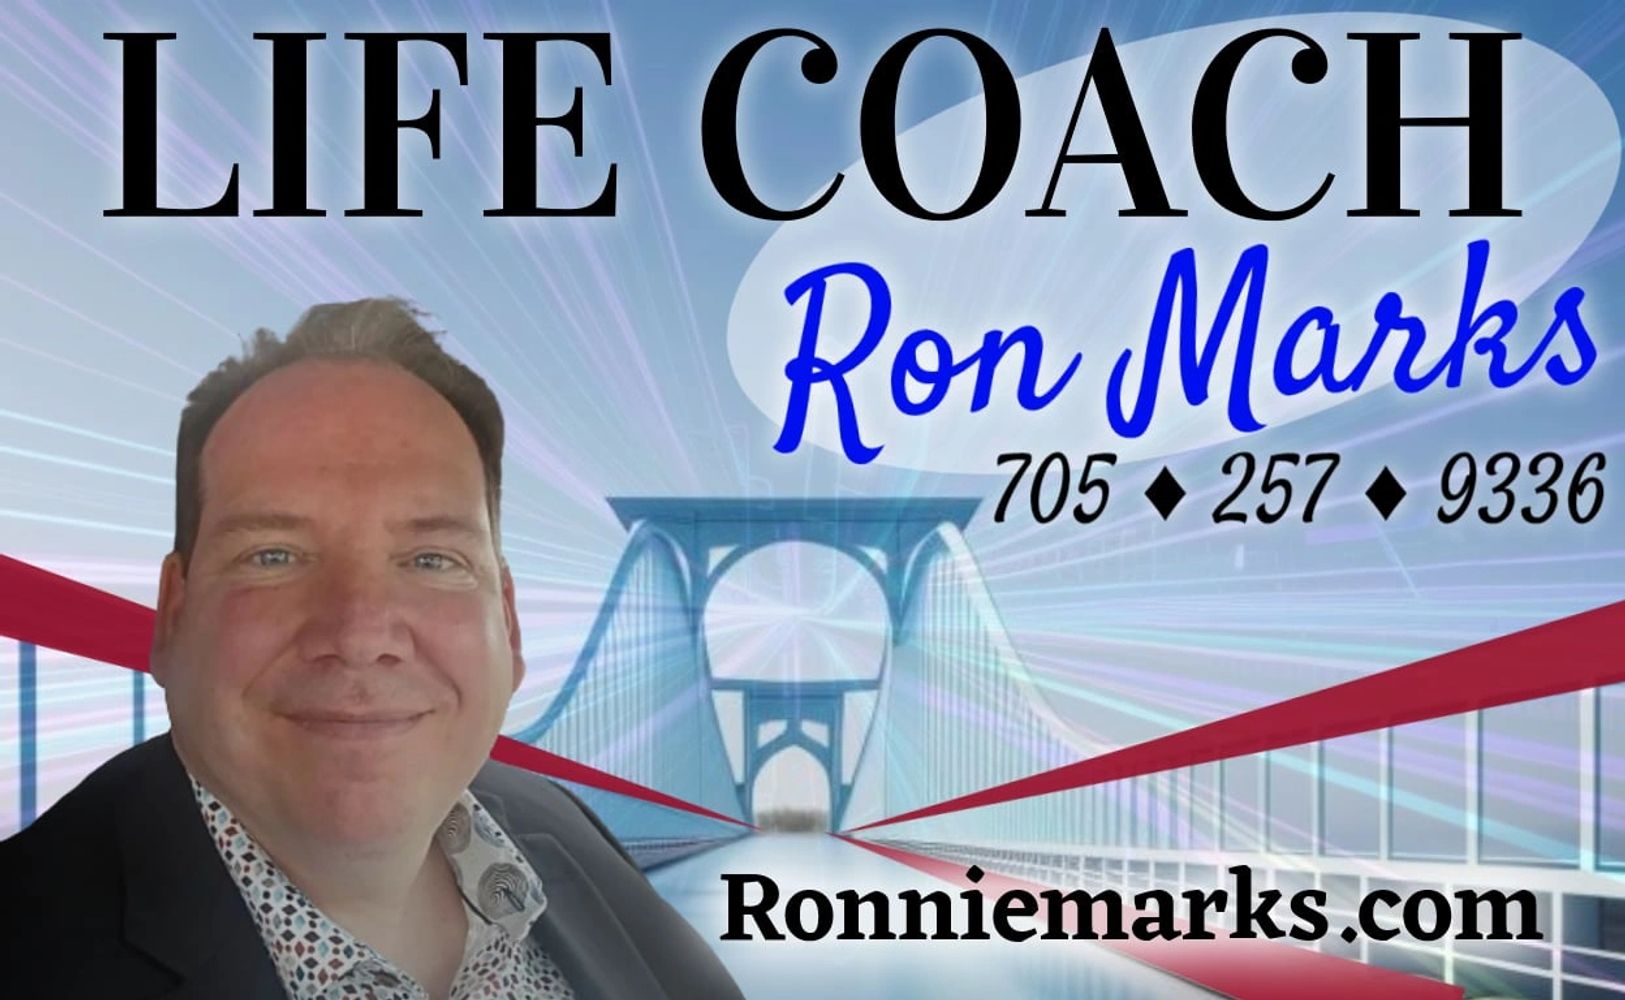 Making people happy one day at a time, through my art, cards and life coaching. Book appt. Today.